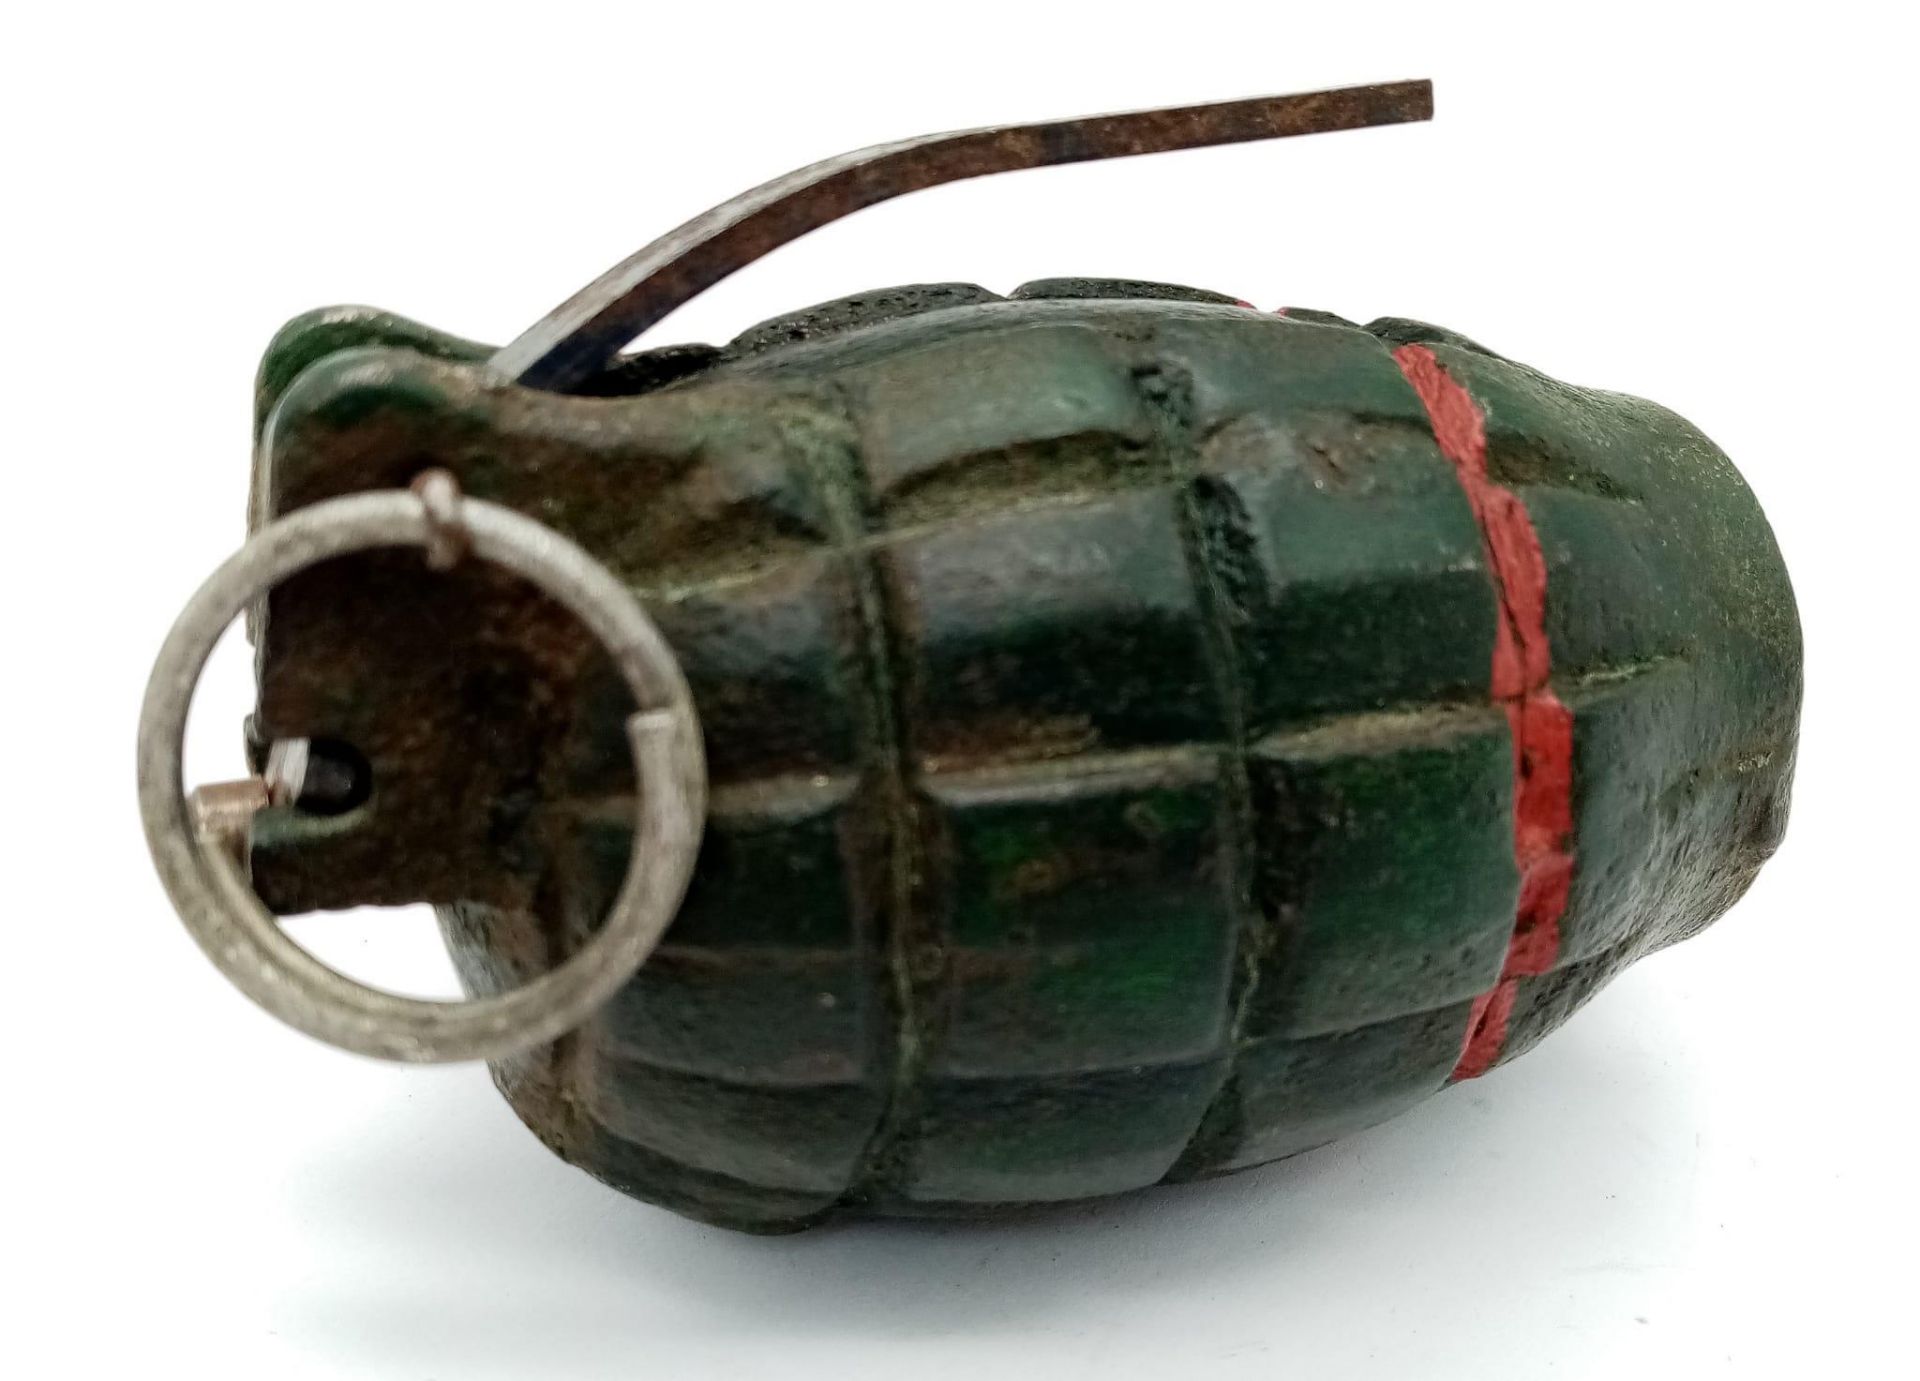 INERT Israeli Made No 36 Mills Grenade. Circa late 1940s-Mid 1950’s. UK Mainland Sales Only. - Image 3 of 6